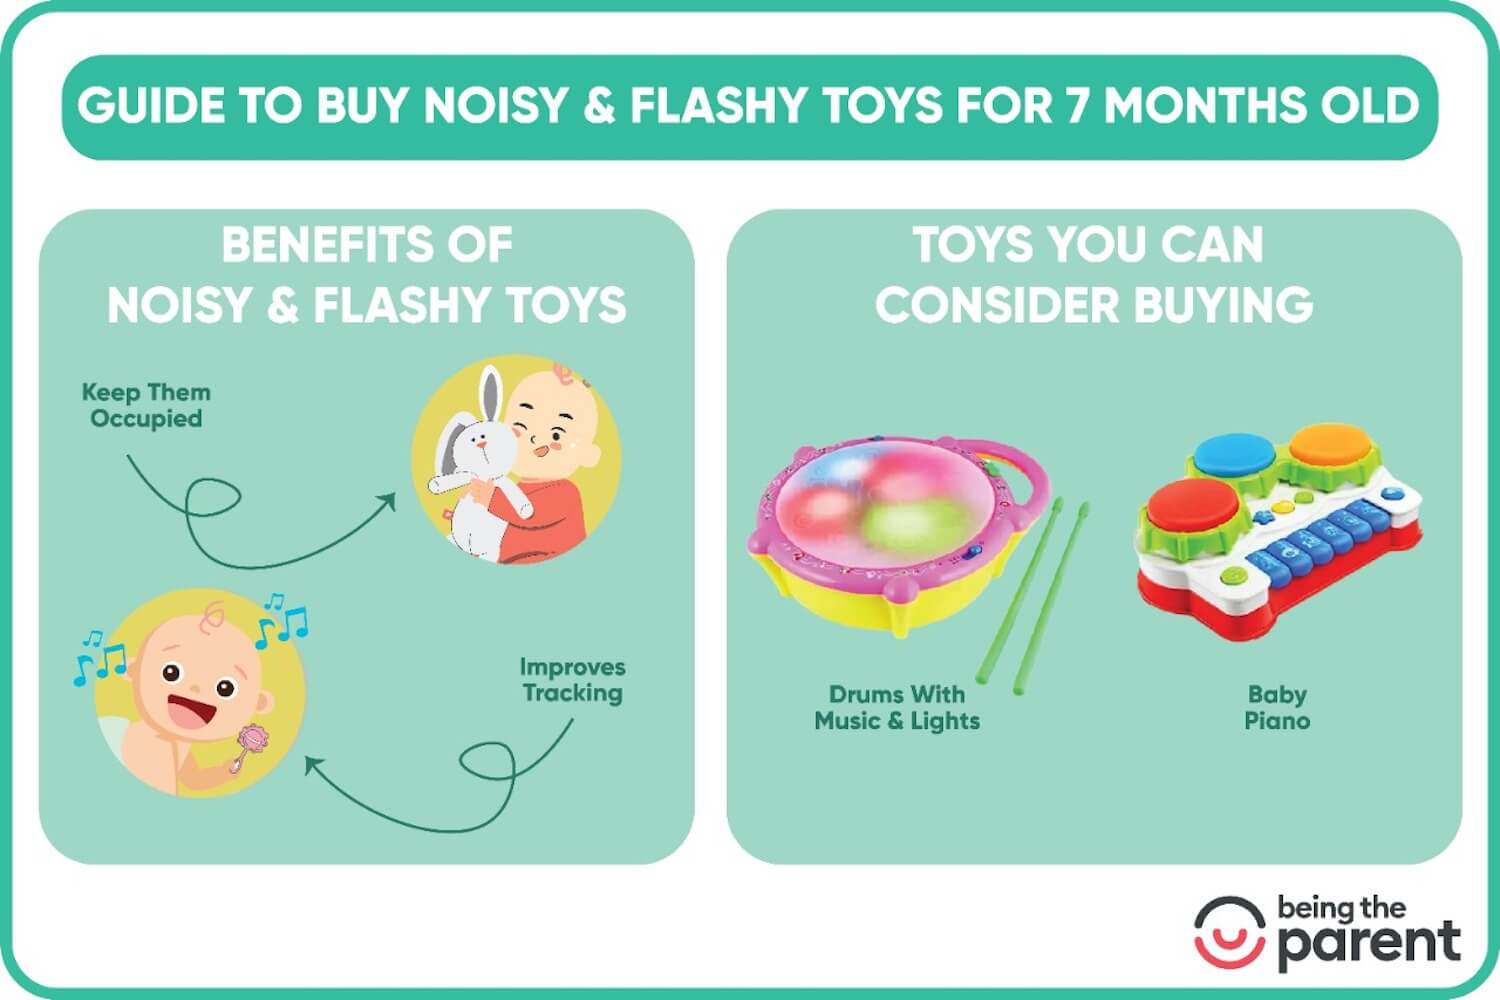 Noisy and Flashy toys for 7 month old